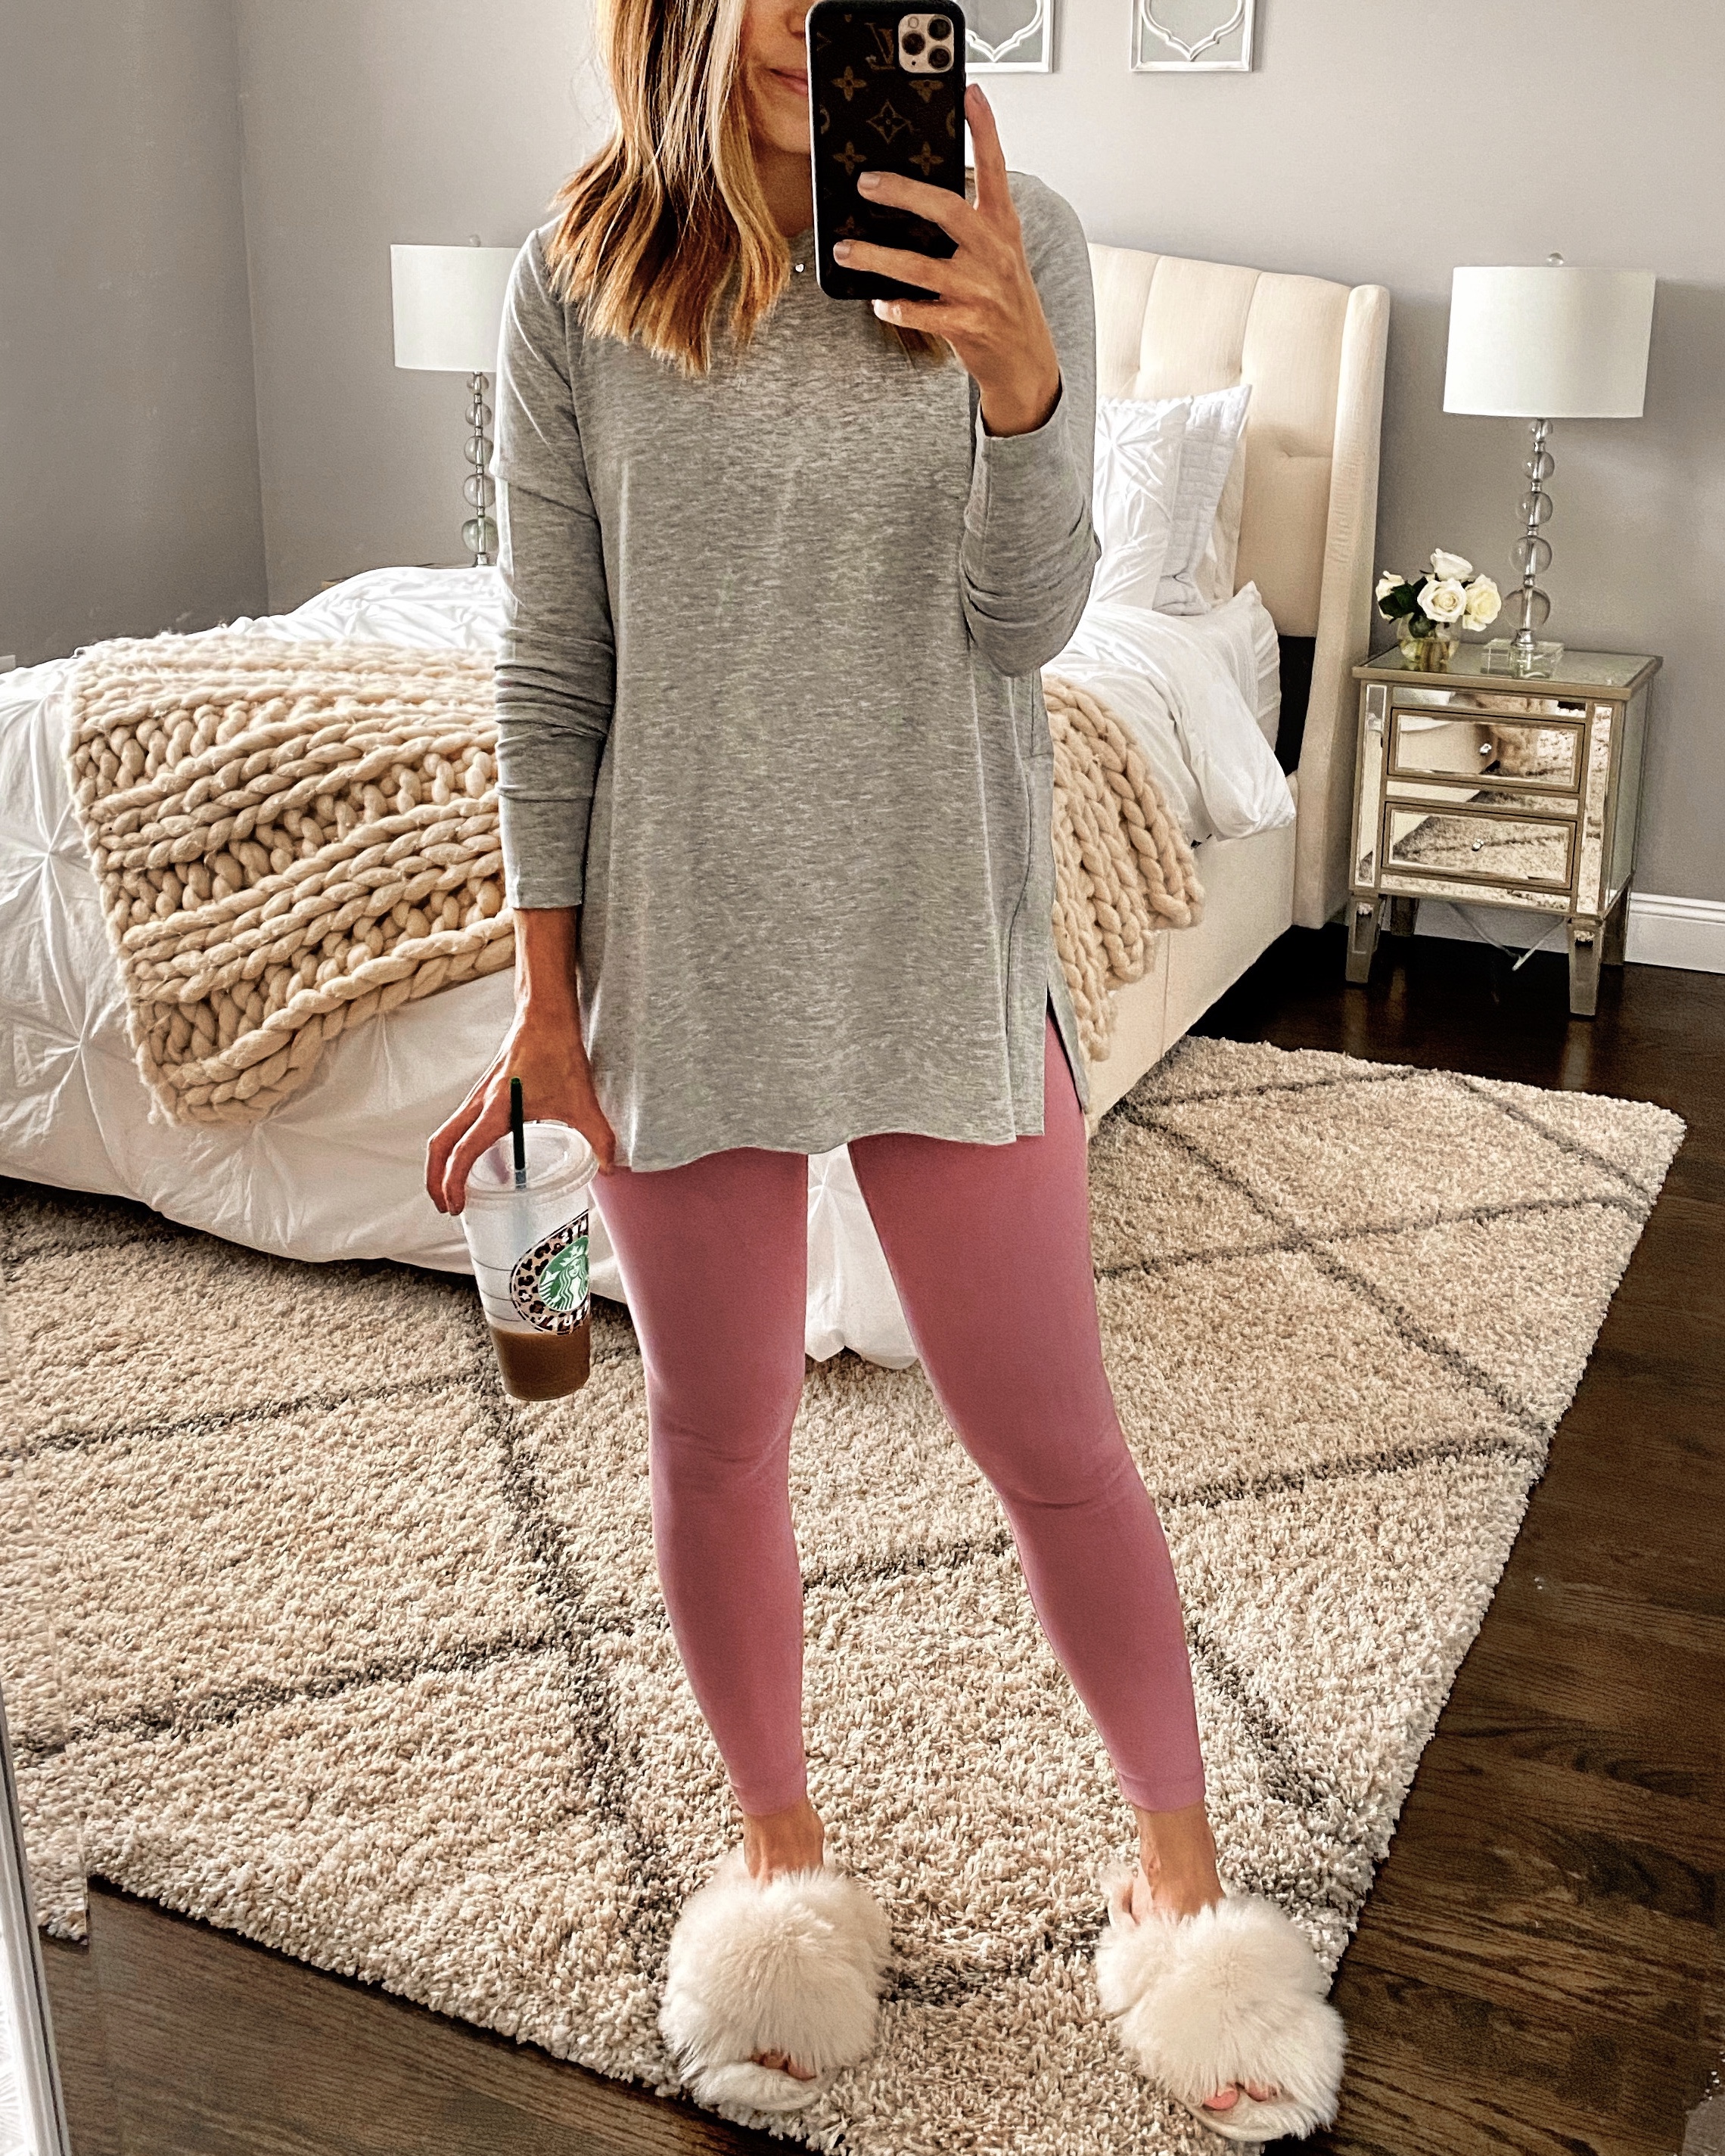 Leggings Outfit Inspiration  International Society of Precision